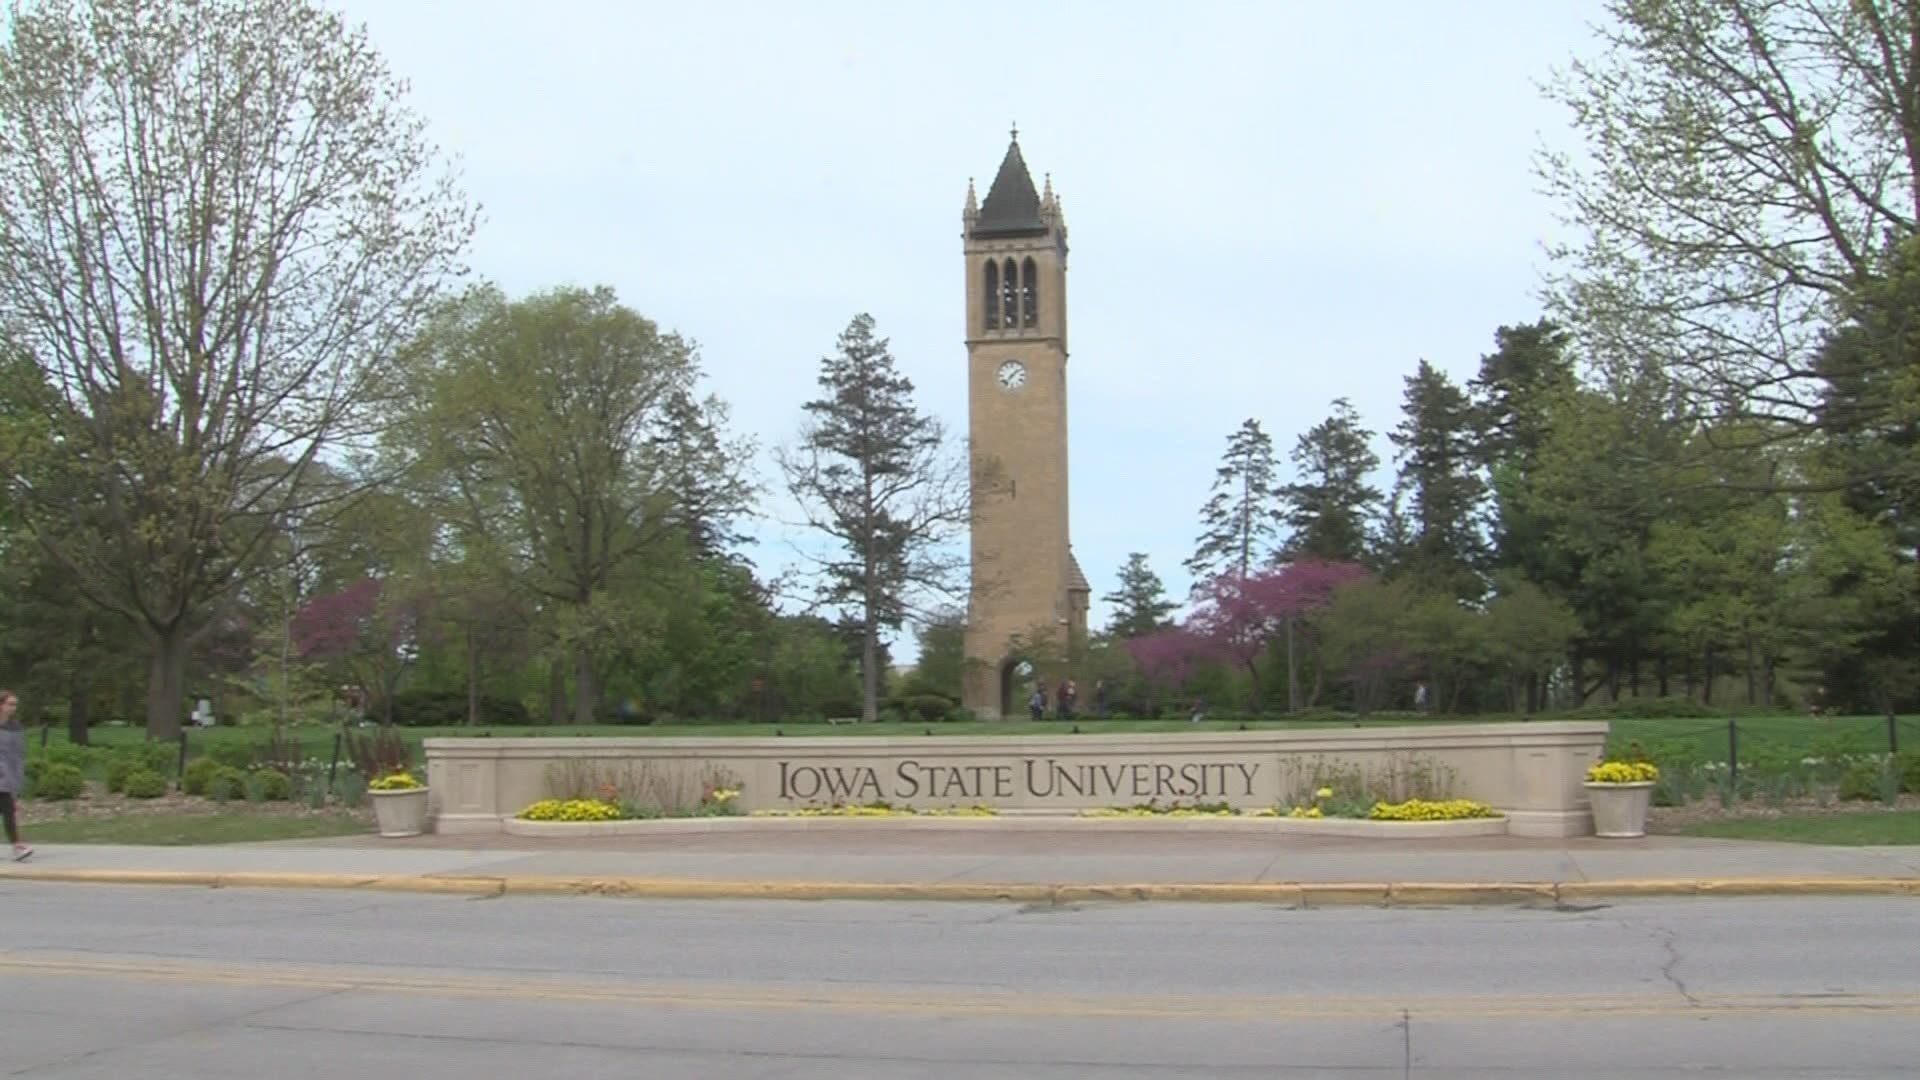 Students who do not follow the rules will face university discipline, ISU police said.